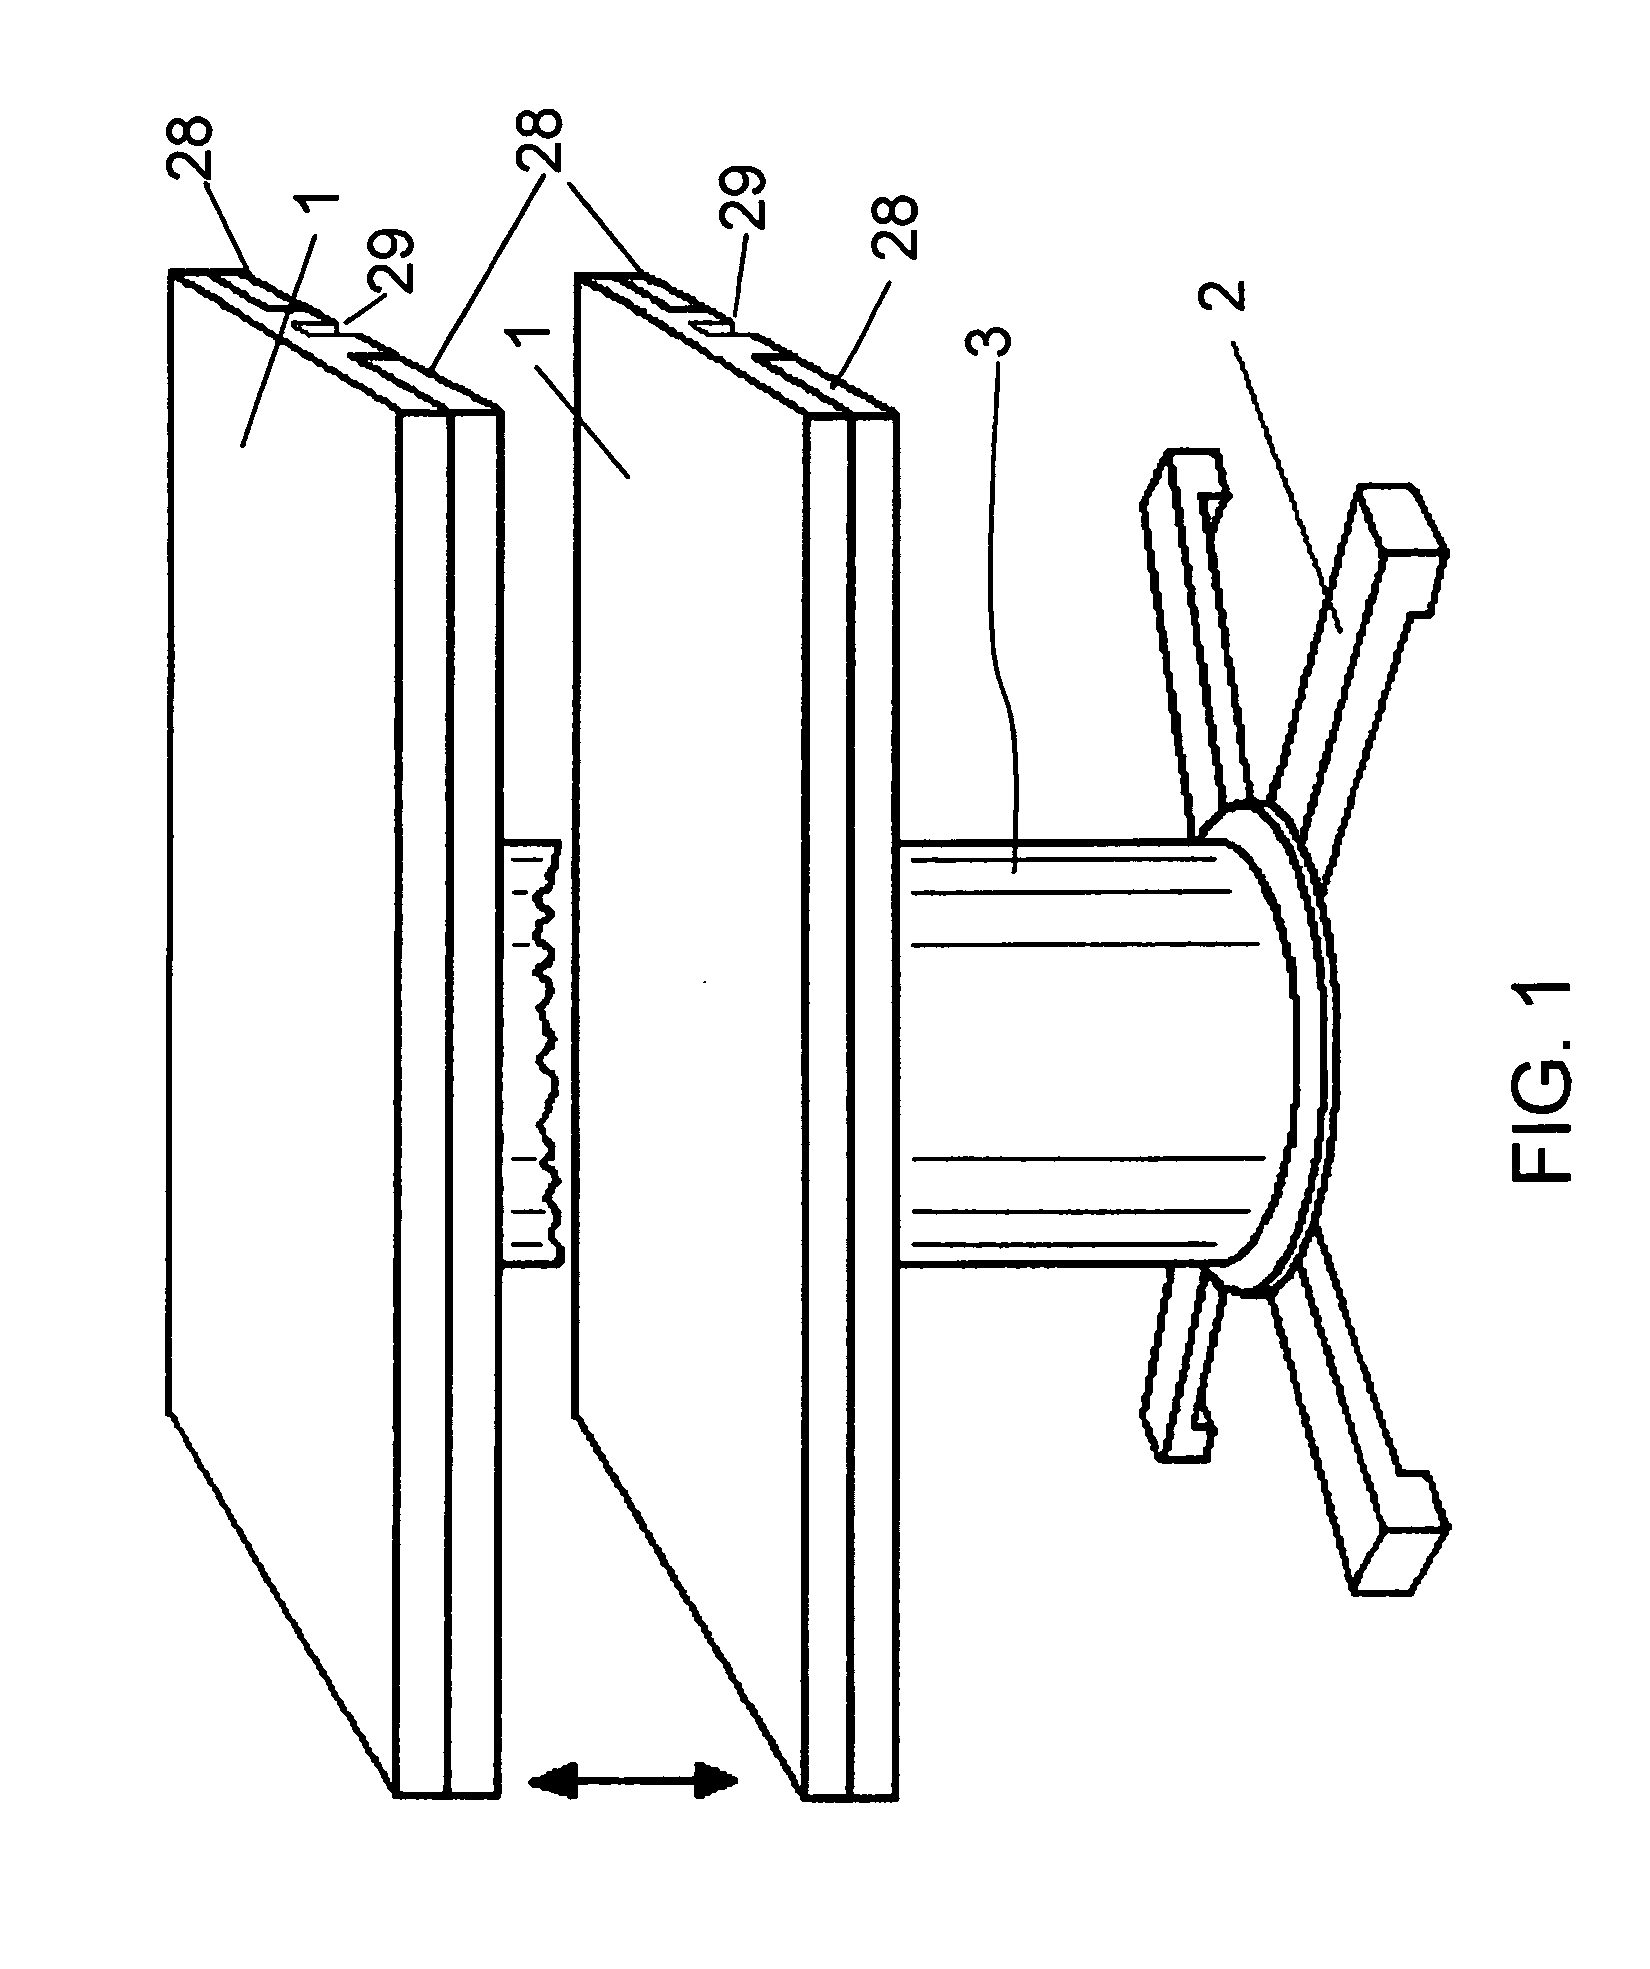 Pneumatic adjustable-height table